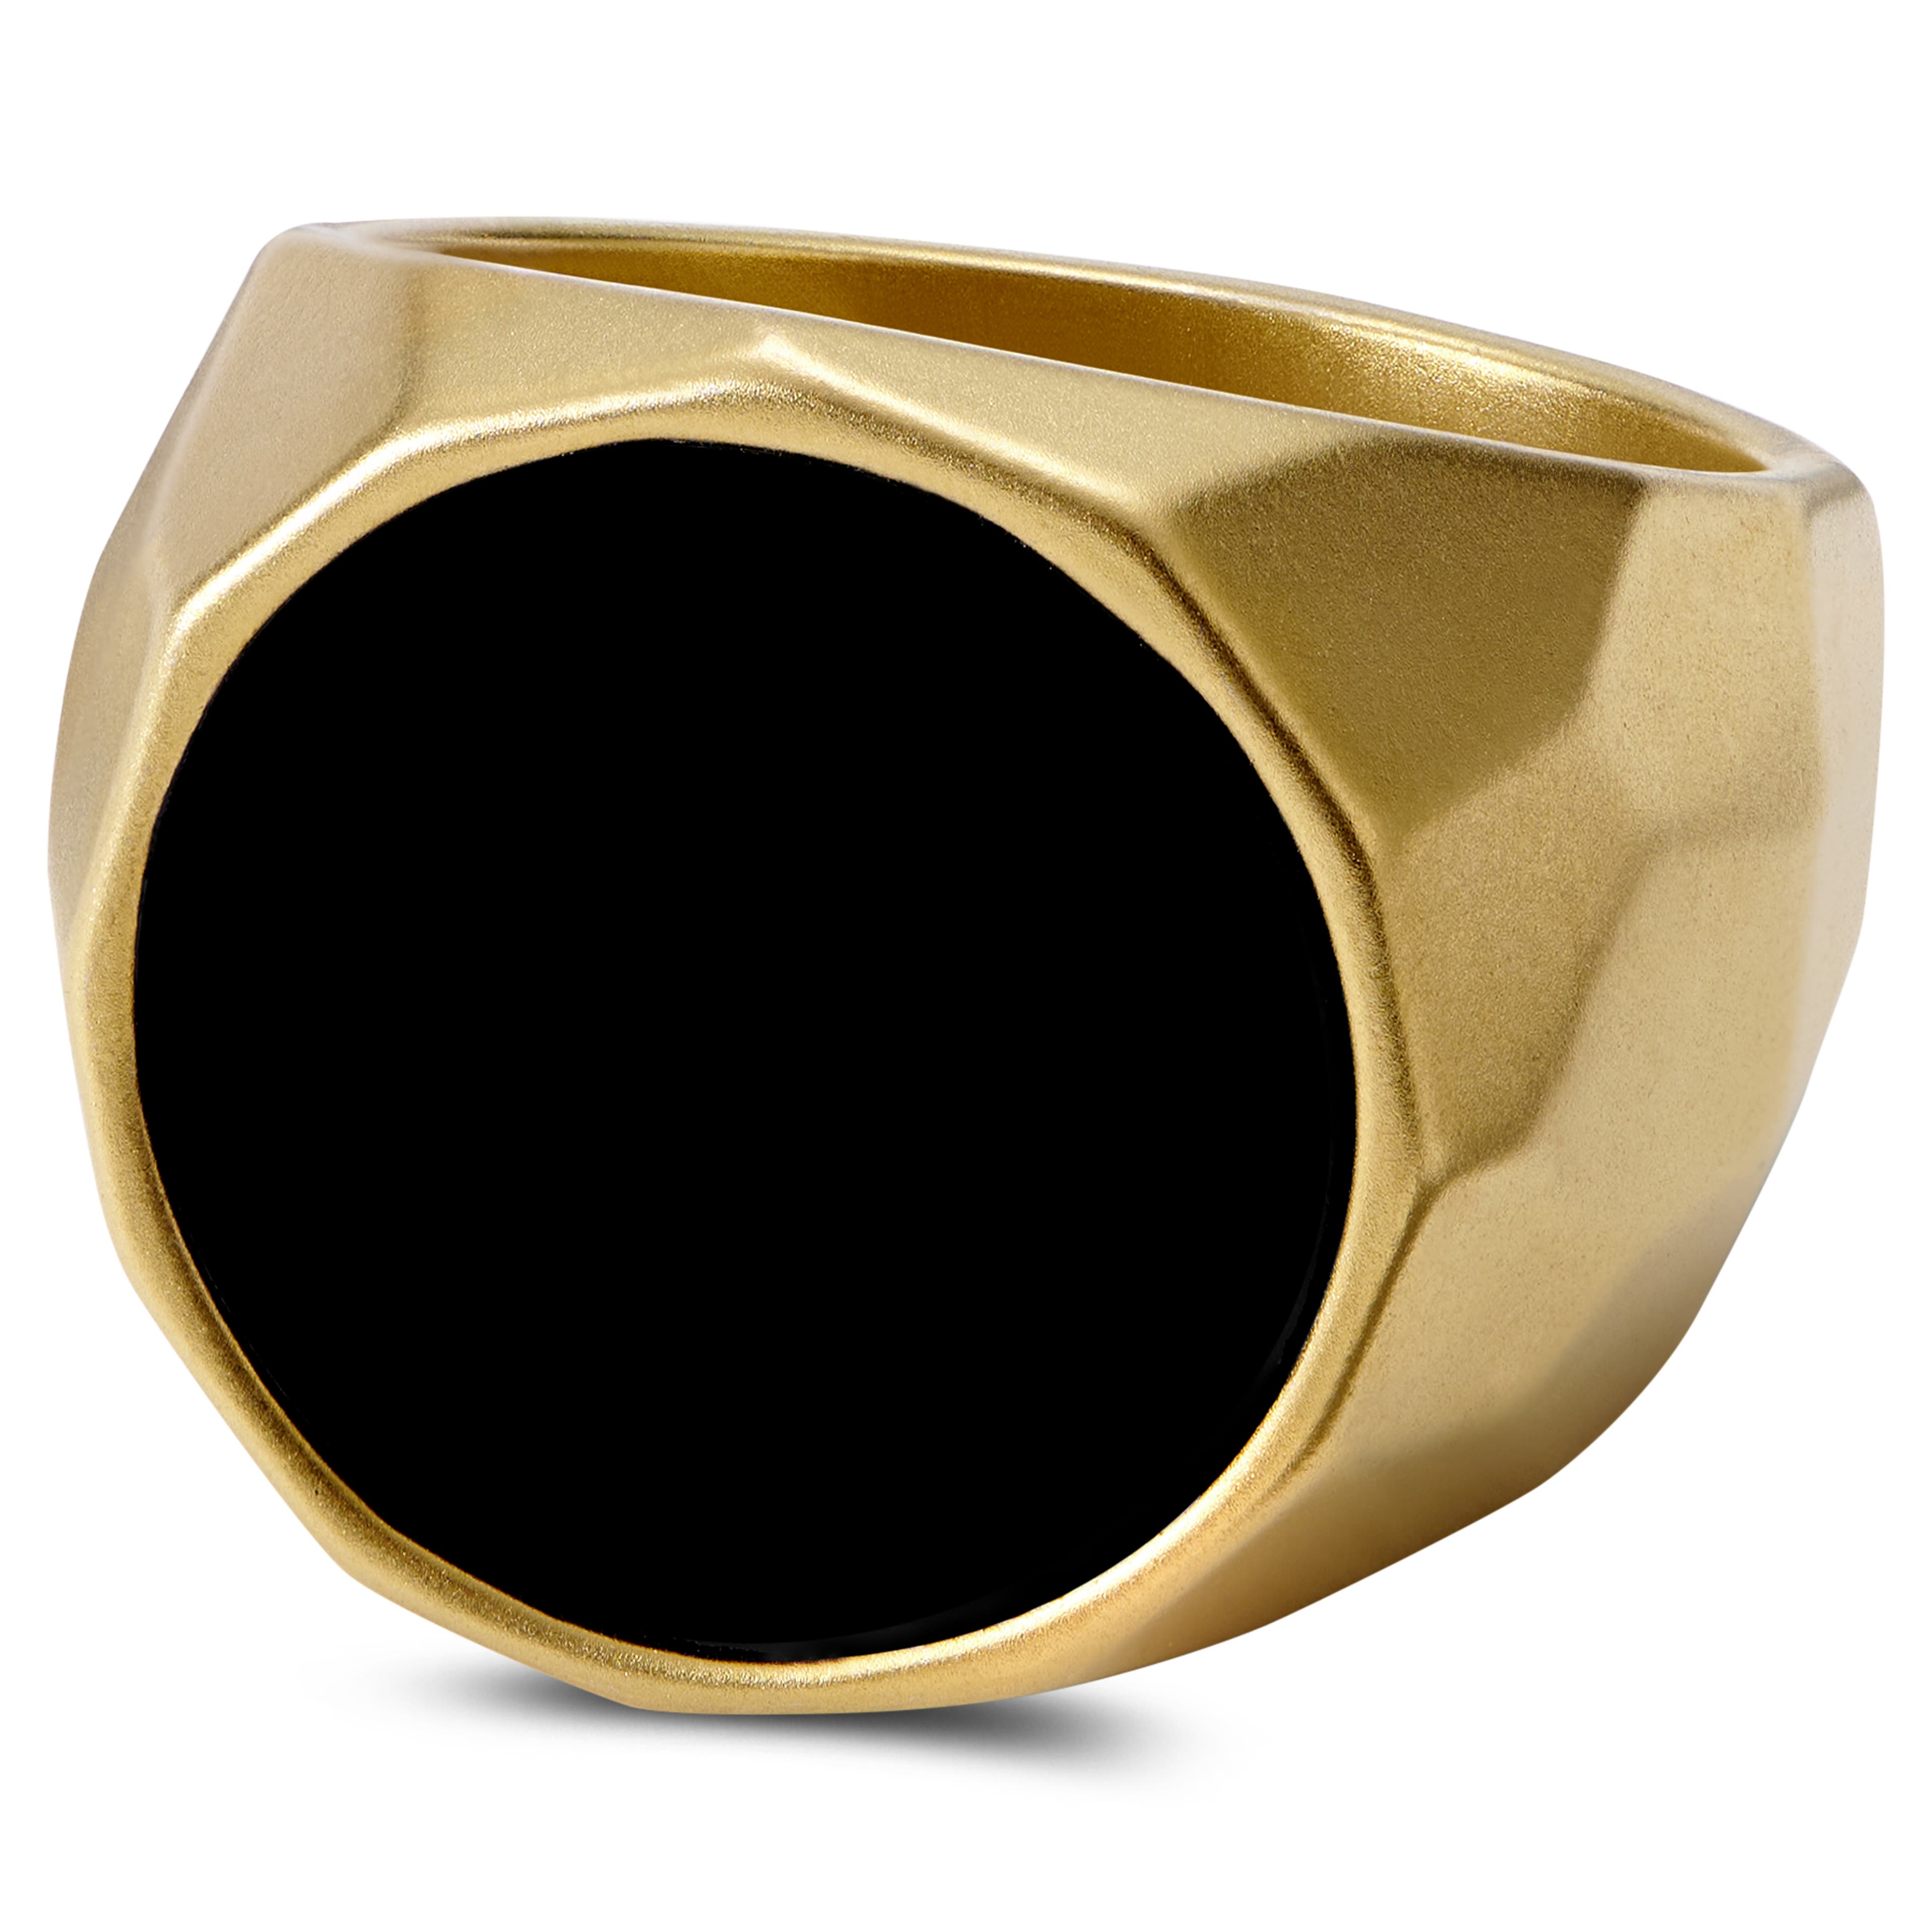 Jax | Gold-Tone With Black Agate Signet Ring